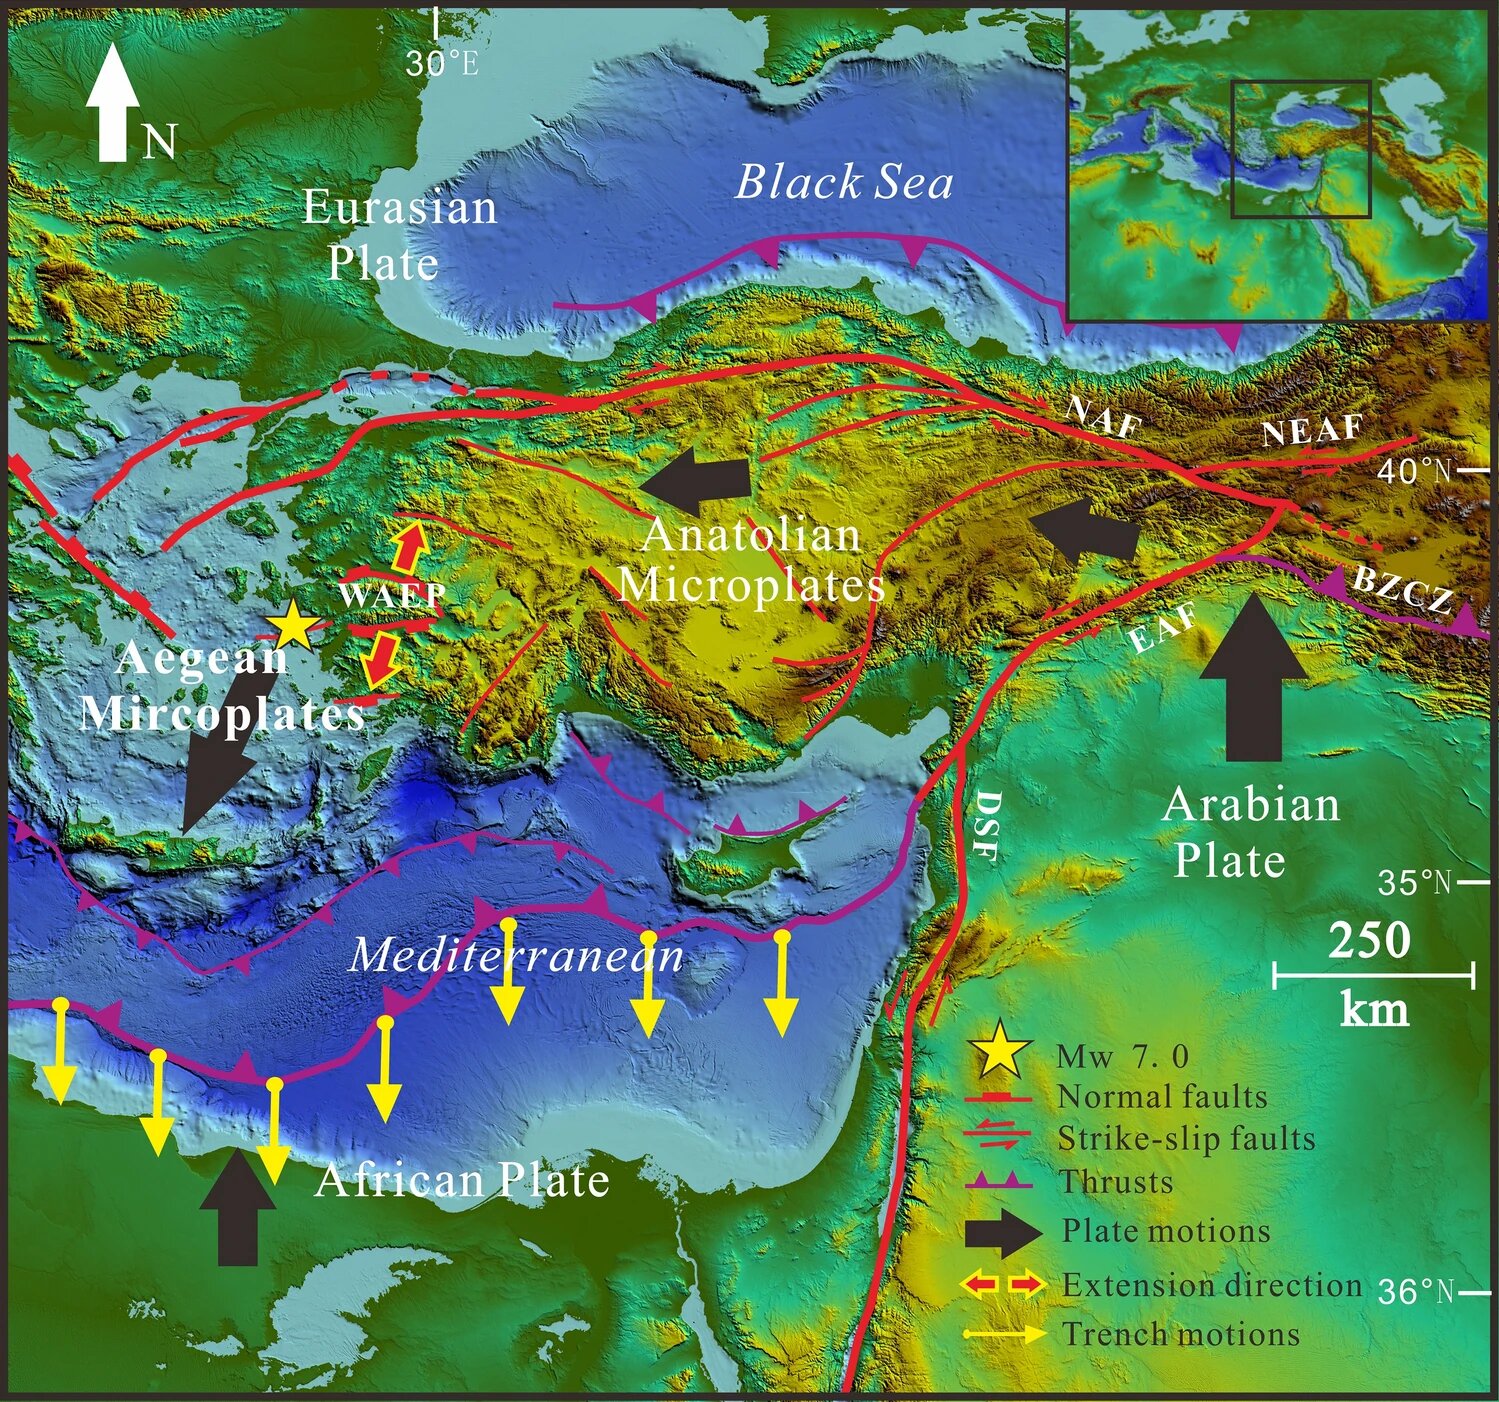 The movement of three competing tectonic plates causes frequent seismic activity in this region. Meng, J., Sinoplu, O., Zhou, Z. et al. Greece and Turkey Shaken by African tectonic retreat. Sci Rep 11, 6486 (2021).